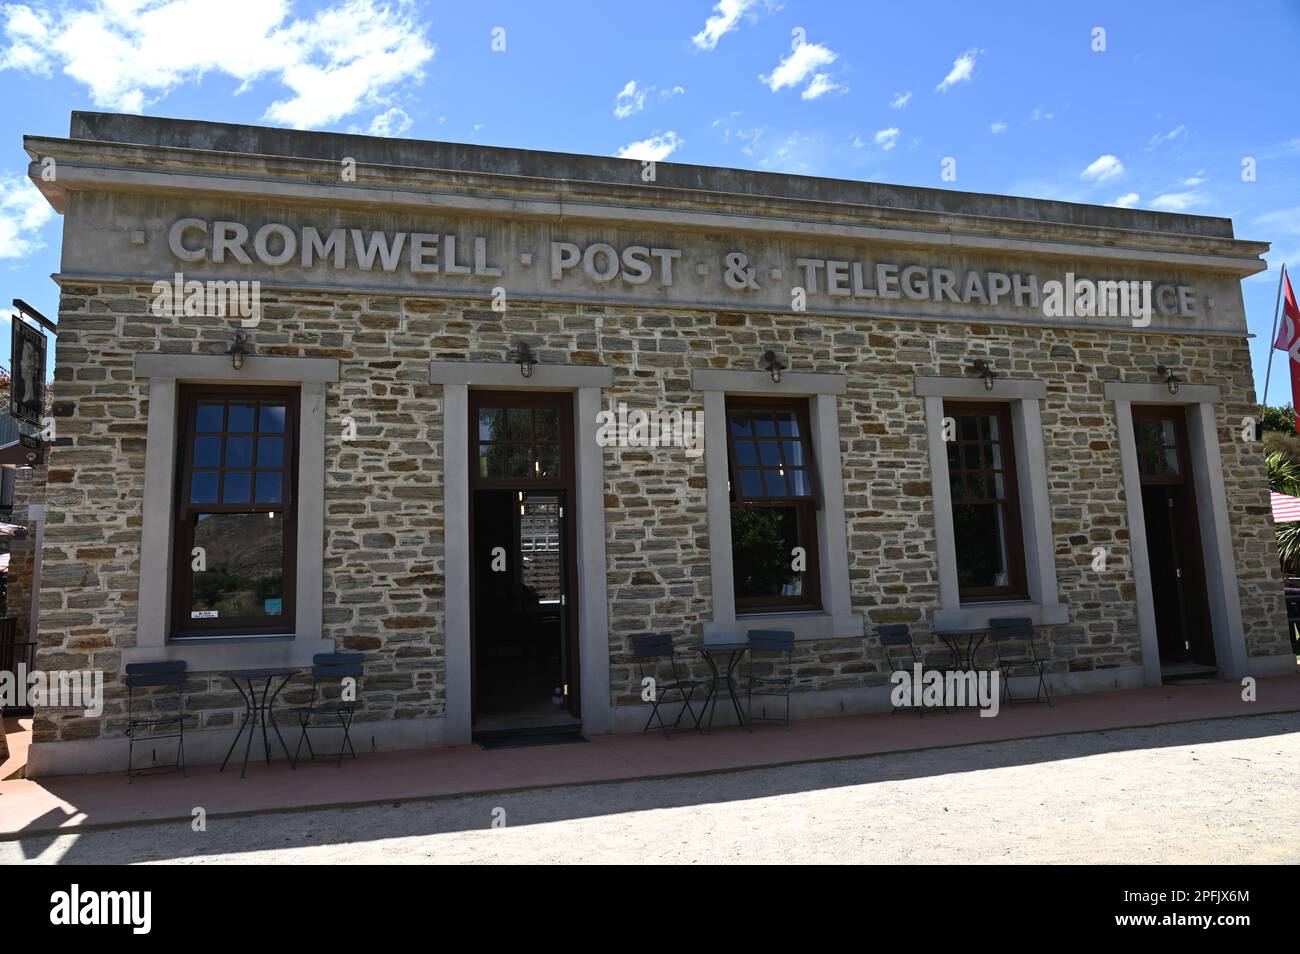 The Old Post and Telegraph Office restored in the Cromwell Historic Precinct.The original was built in 1869. Others have followed, this being the last Stock Photo